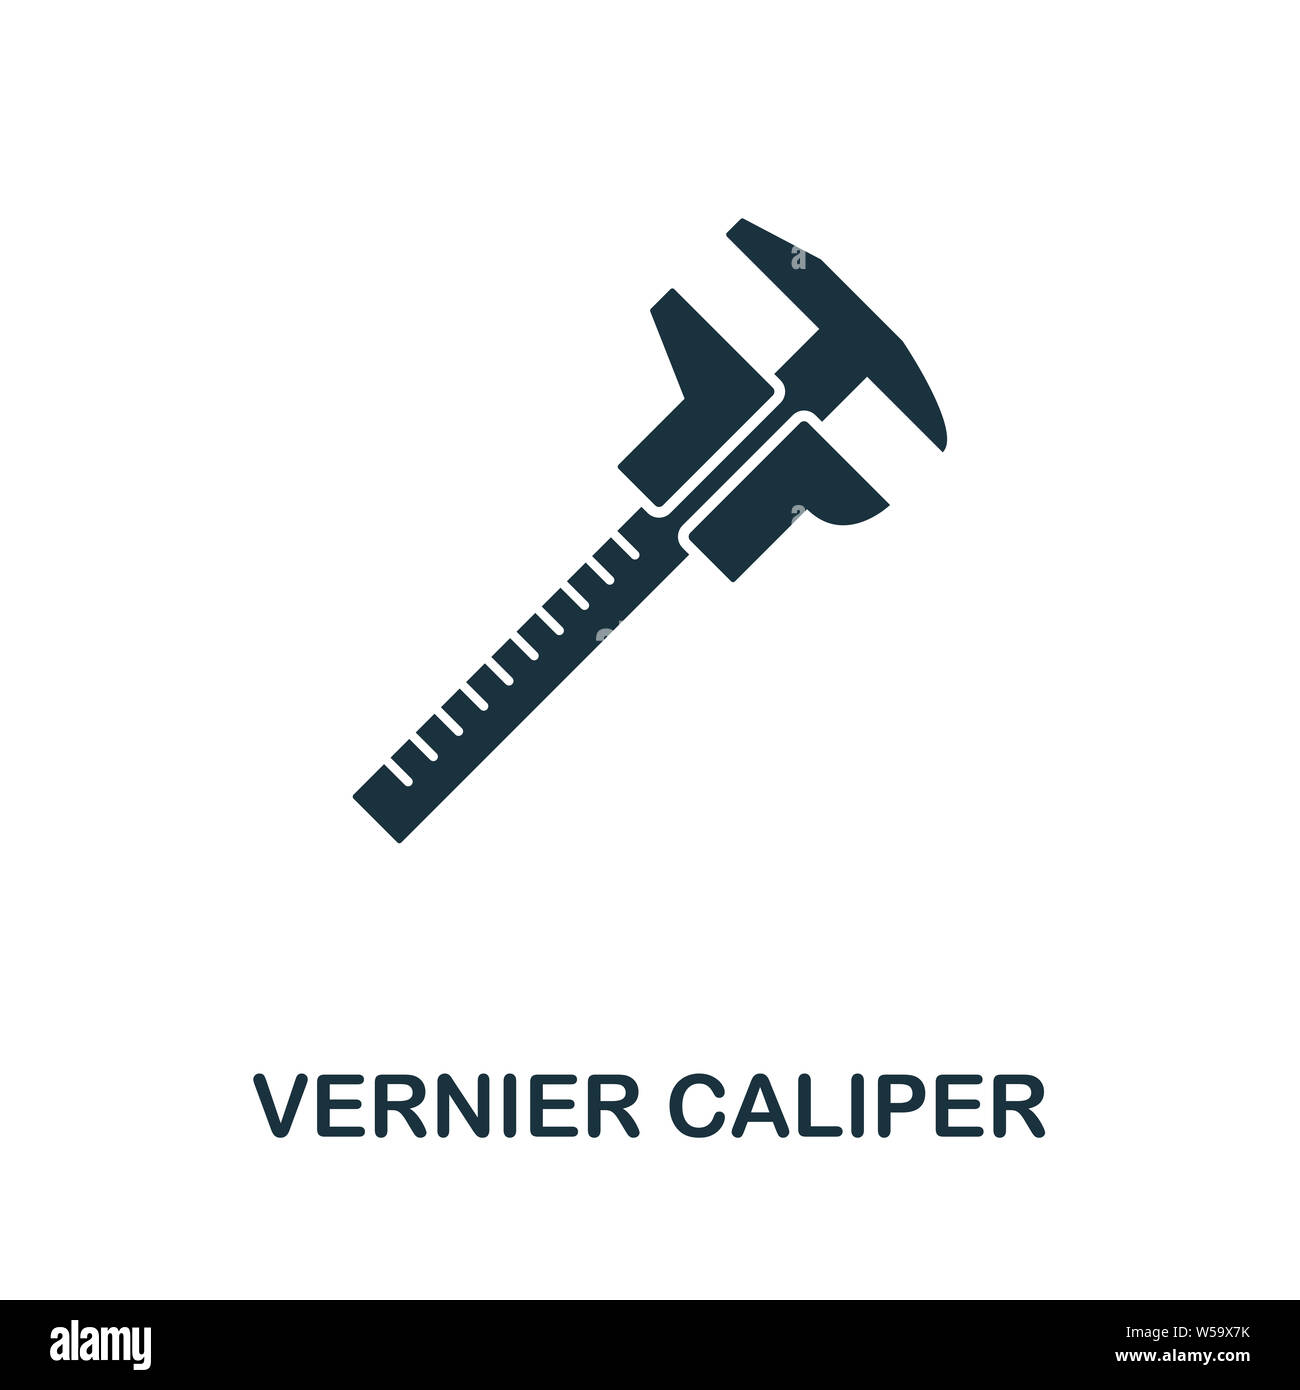 Vernier Caliper icon symbol. Creative sign from construction tools icons collection. Filled flat Vernier Caliper icon for computer and mobile Stock Photo